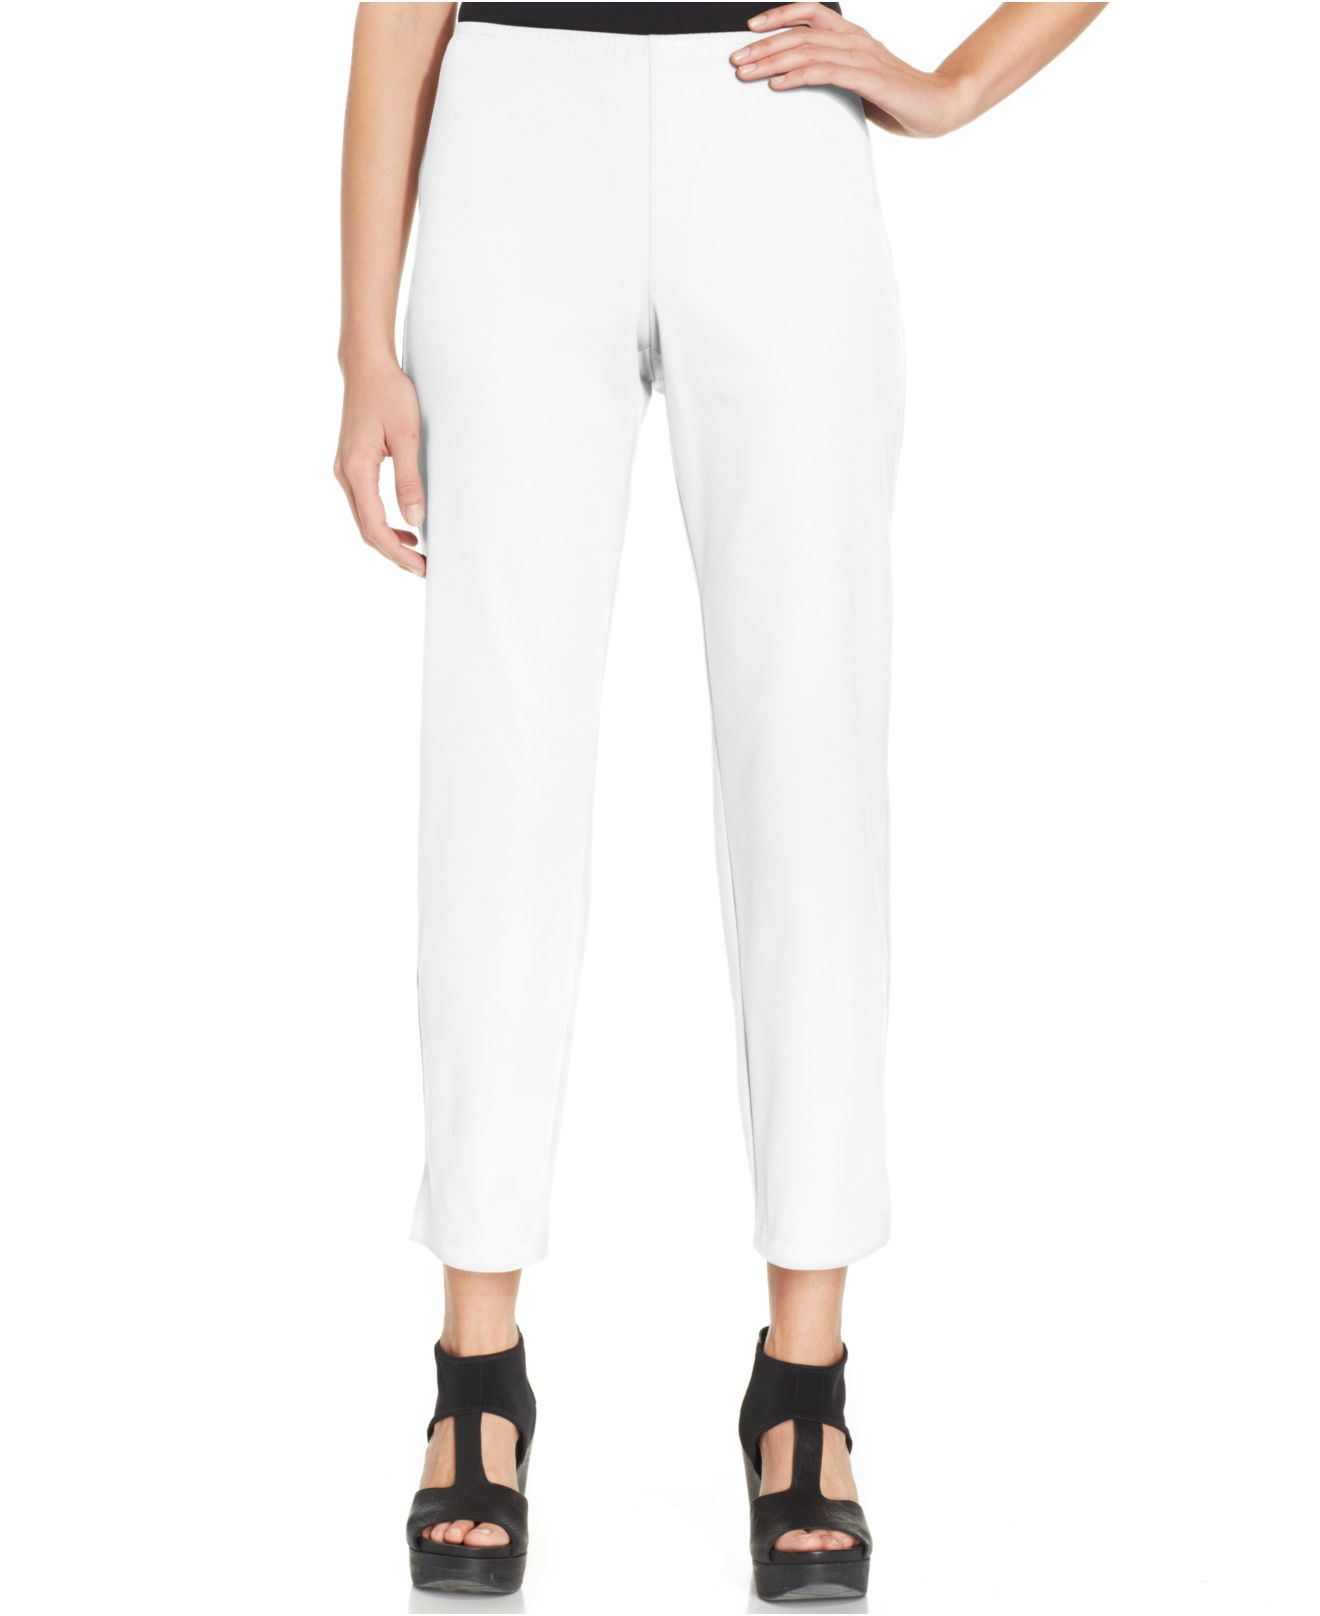 UNIQLO EZY Relaxed Fit Ankle Pants White, Men's Fashion, Bottoms, Trousers  on Carousell